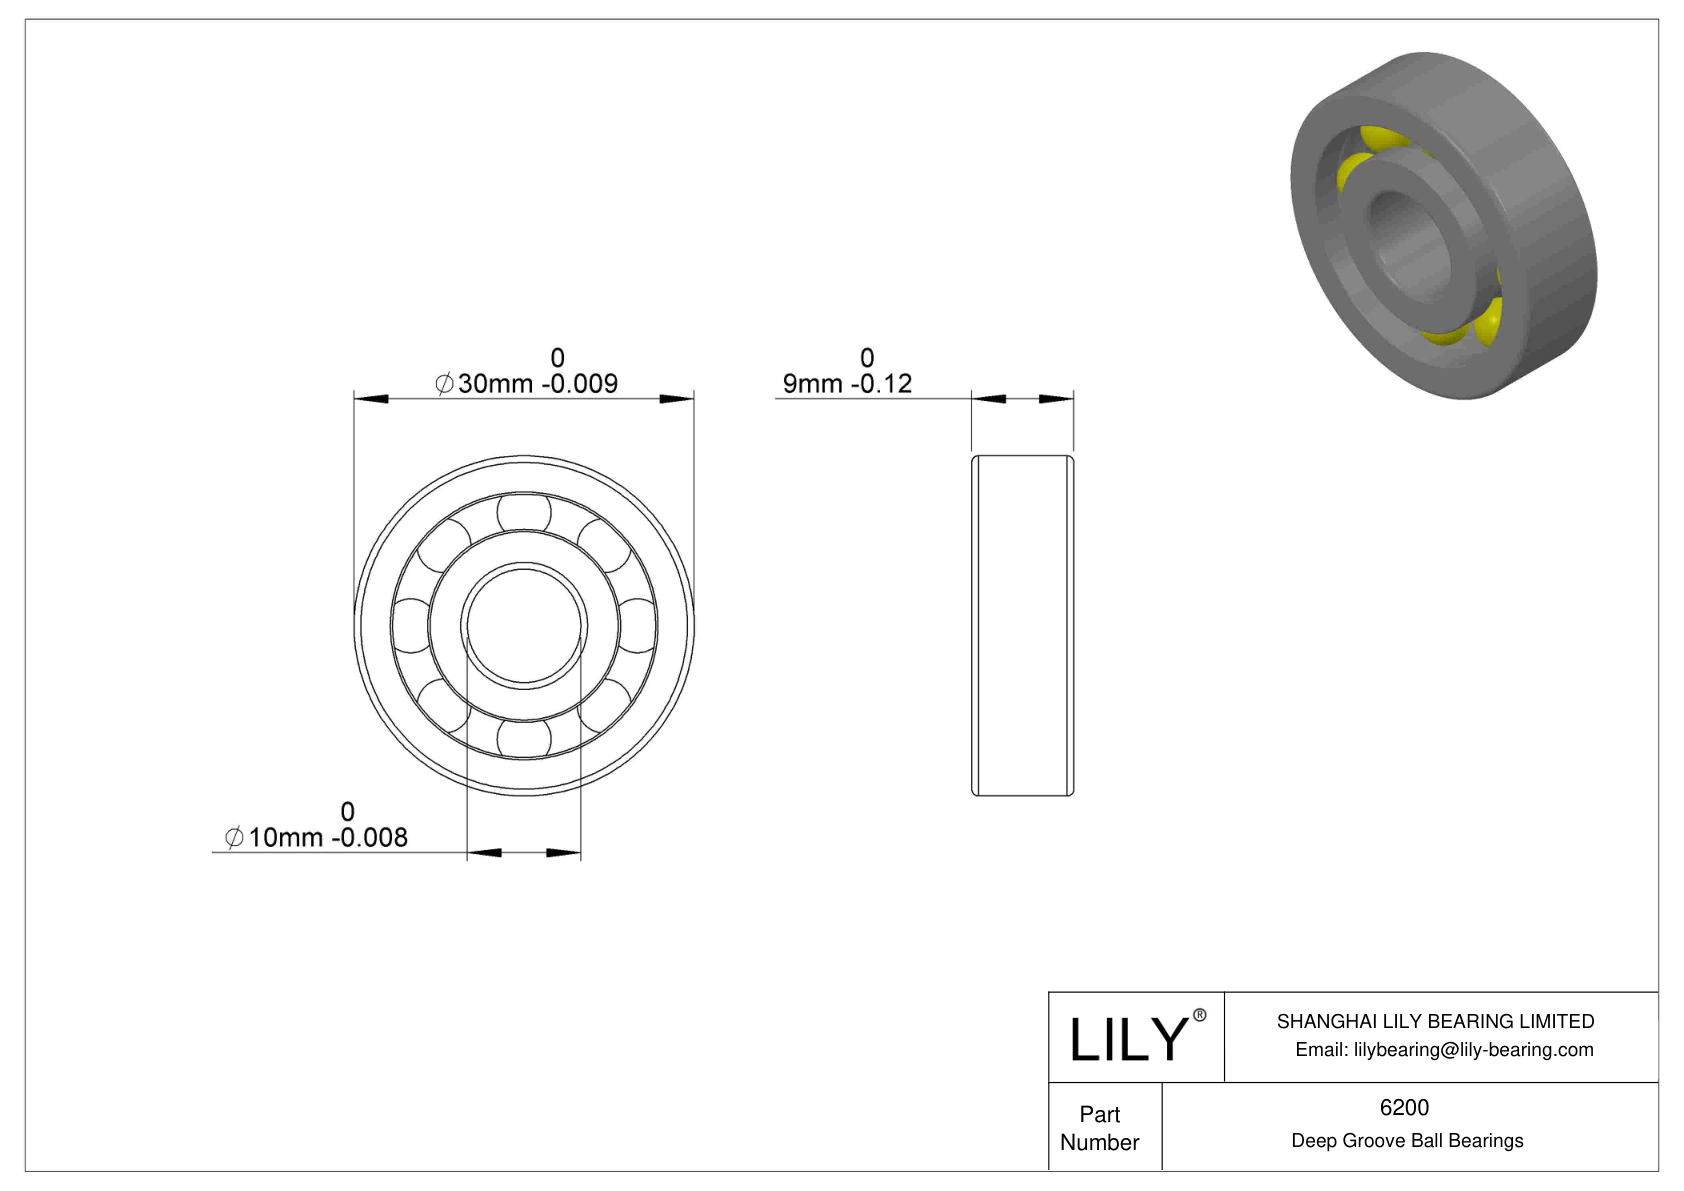 LILY-PU620036-16C2L10M8 Polyurethane Coated Bearing With Screw cad drawing